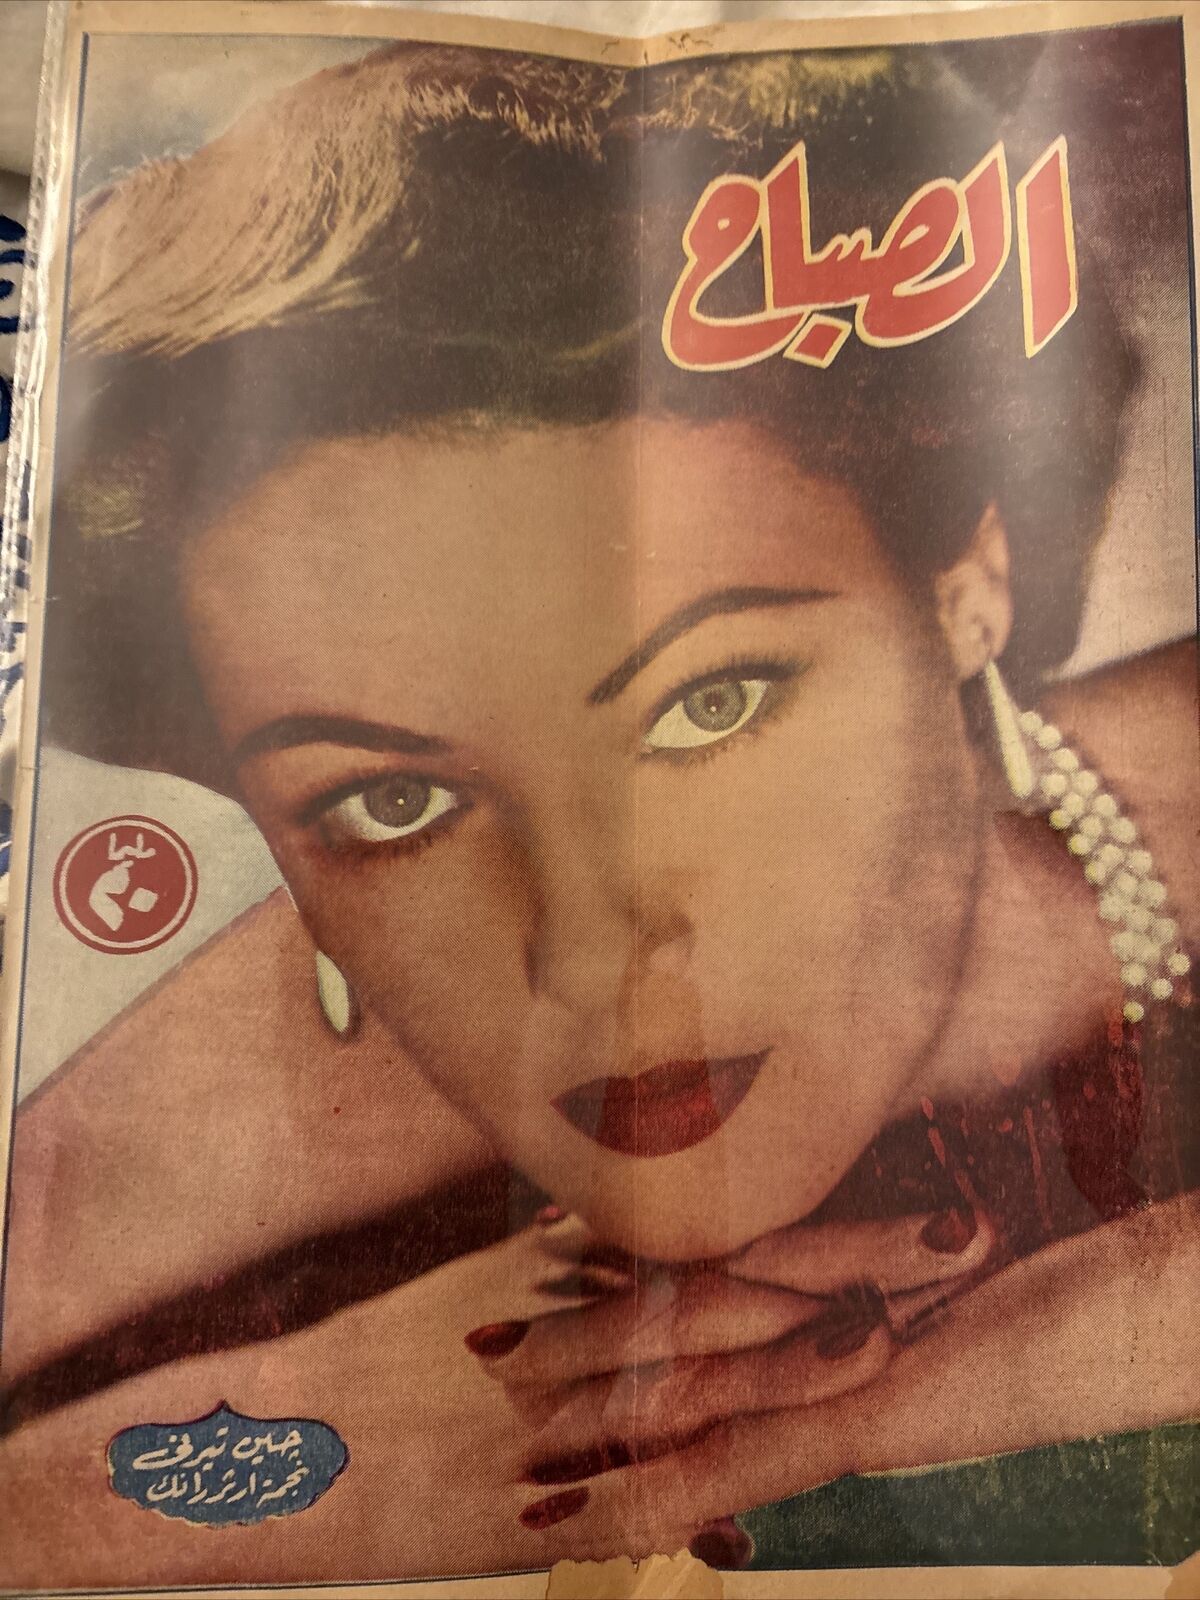 1955 Magazine Actress Gene Tierney Cover Arabic Scarce Cover Great Cond